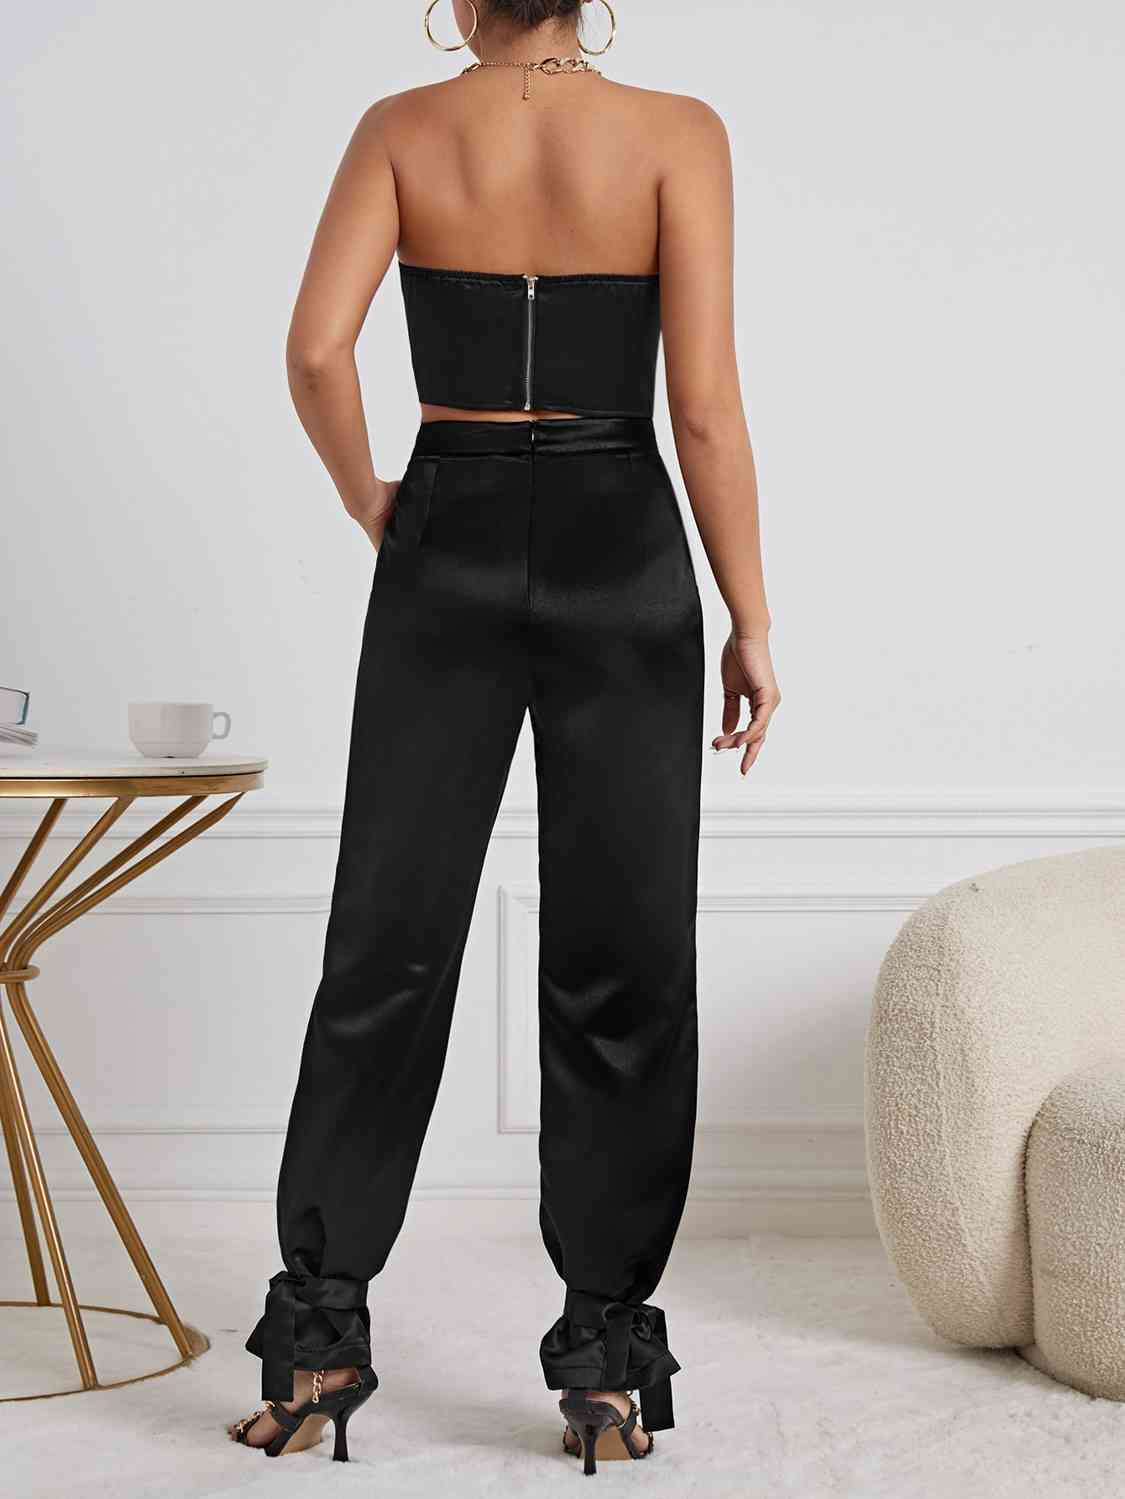 Knotty Elegance Tube Top and Pants Set